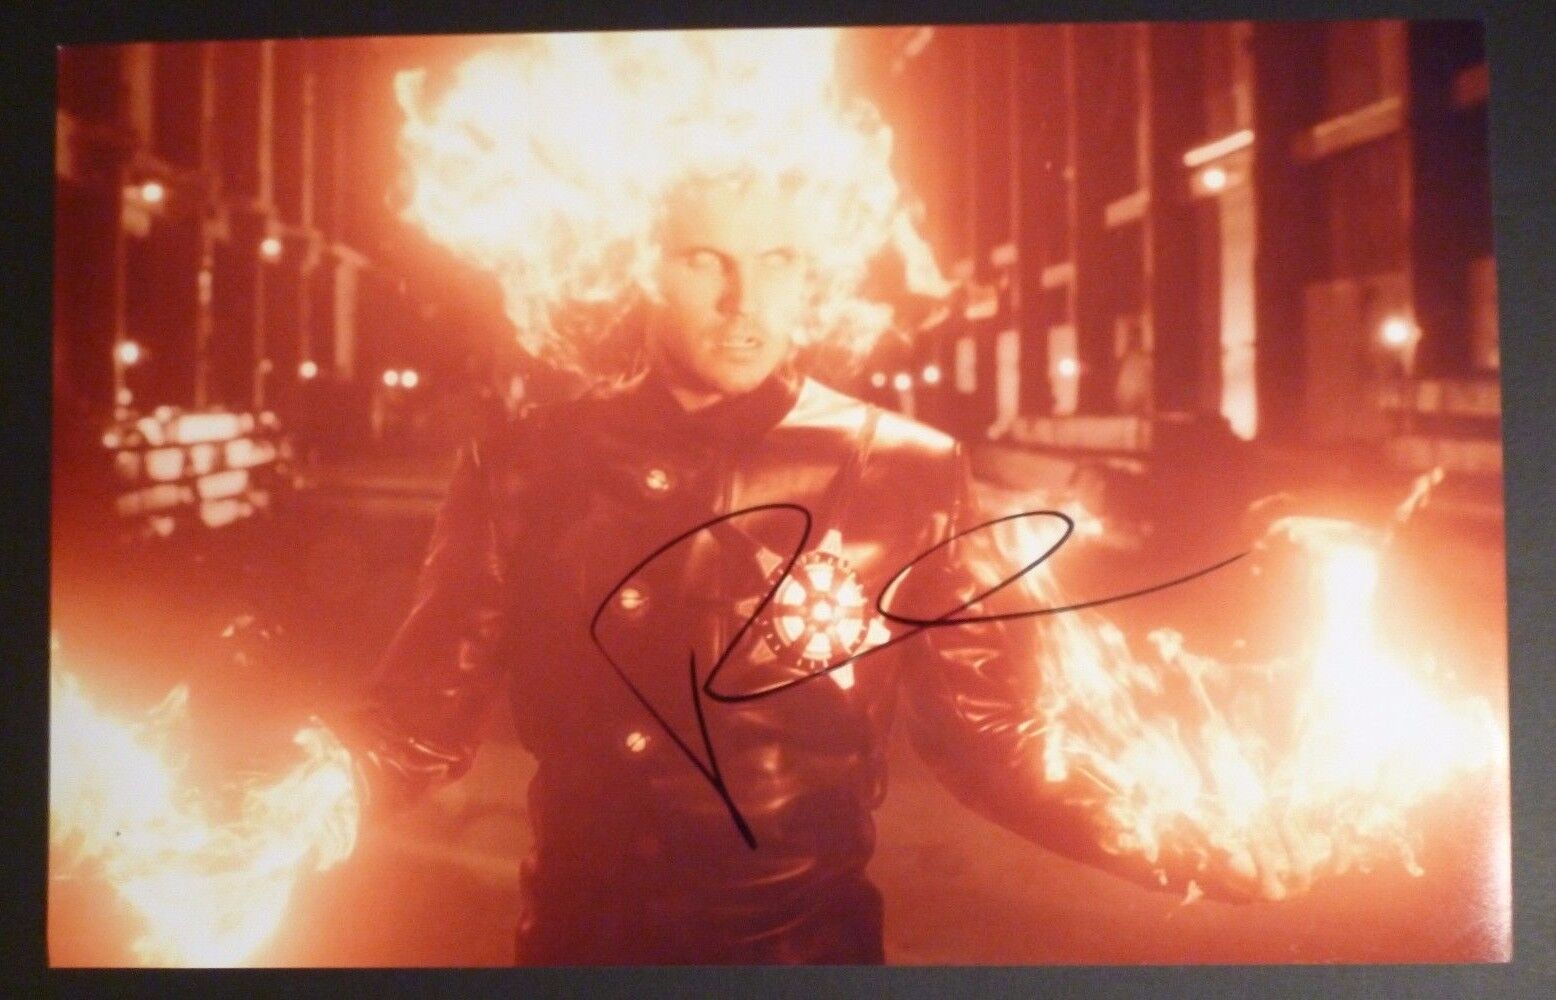 ROBBIE AMELL Auth. Hand-Signed THE FLASH - DEATHSTORM / FIRESTORM